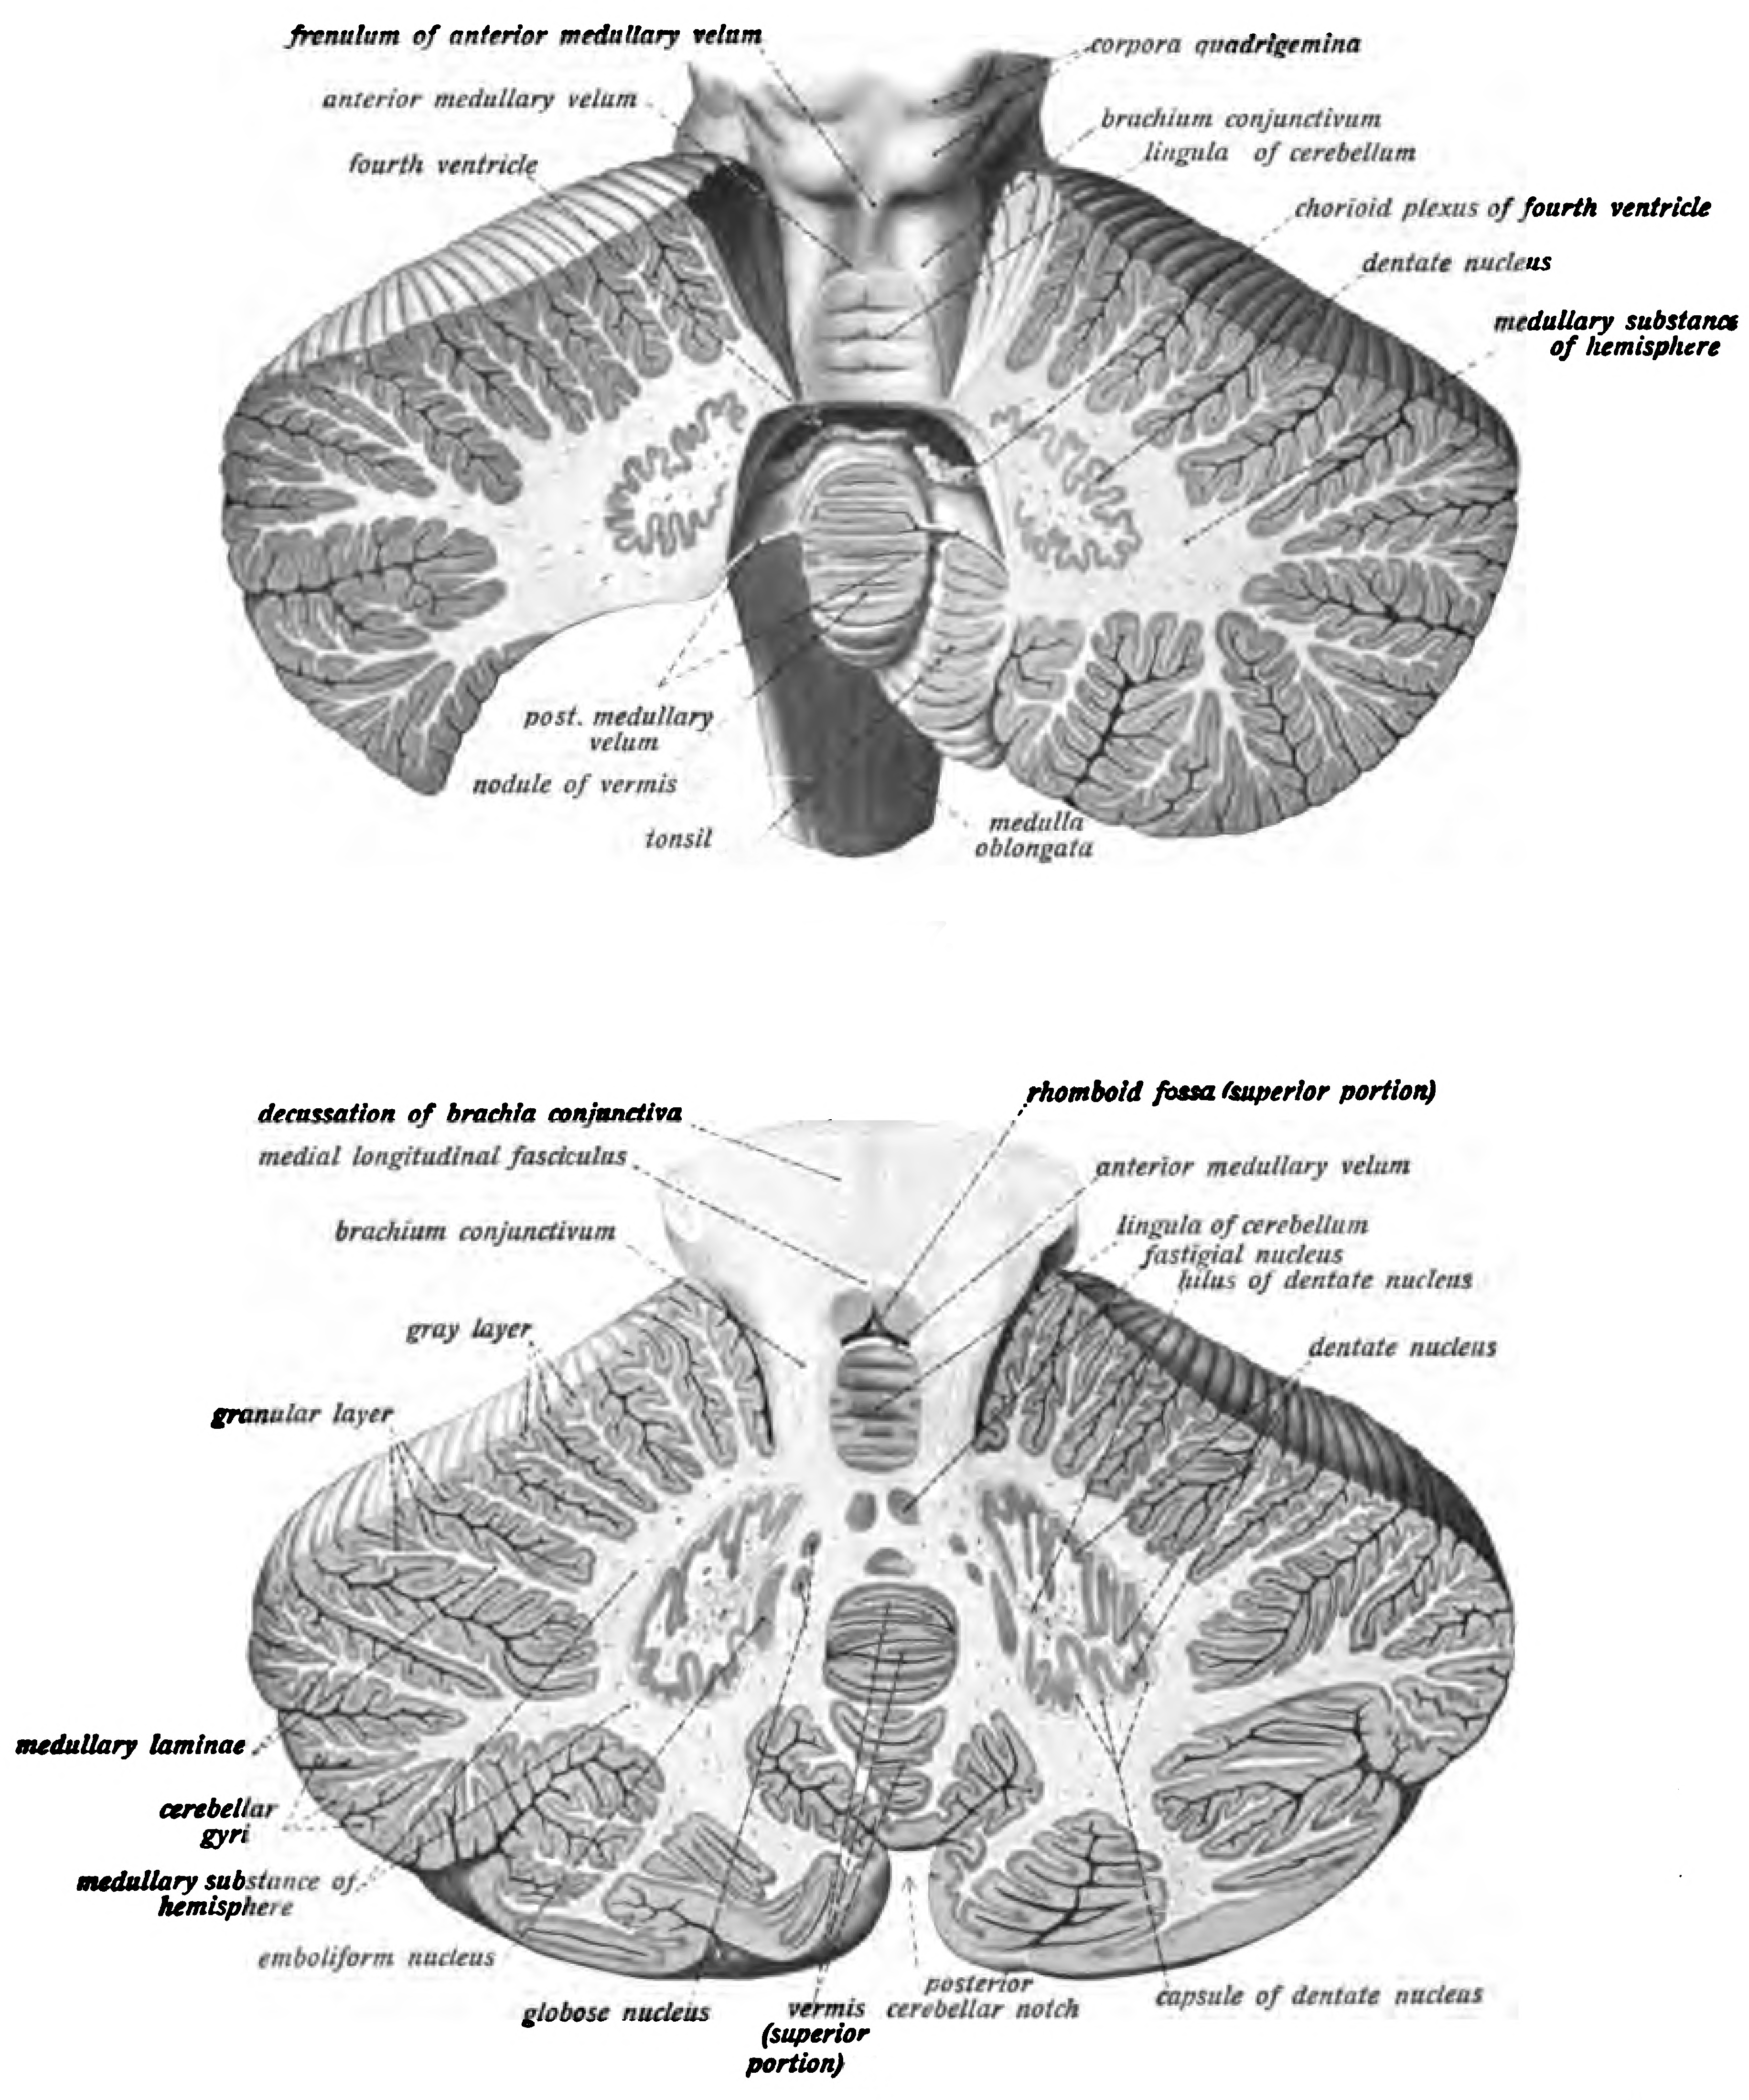 Parts of the cerebellum were removed to expose the fourth ventricle (top) and cross section of the cerebellum showing the cerebellar nuclei (bottom). Sobotta’s Textbook and Atlas of Human Anatomy 1909